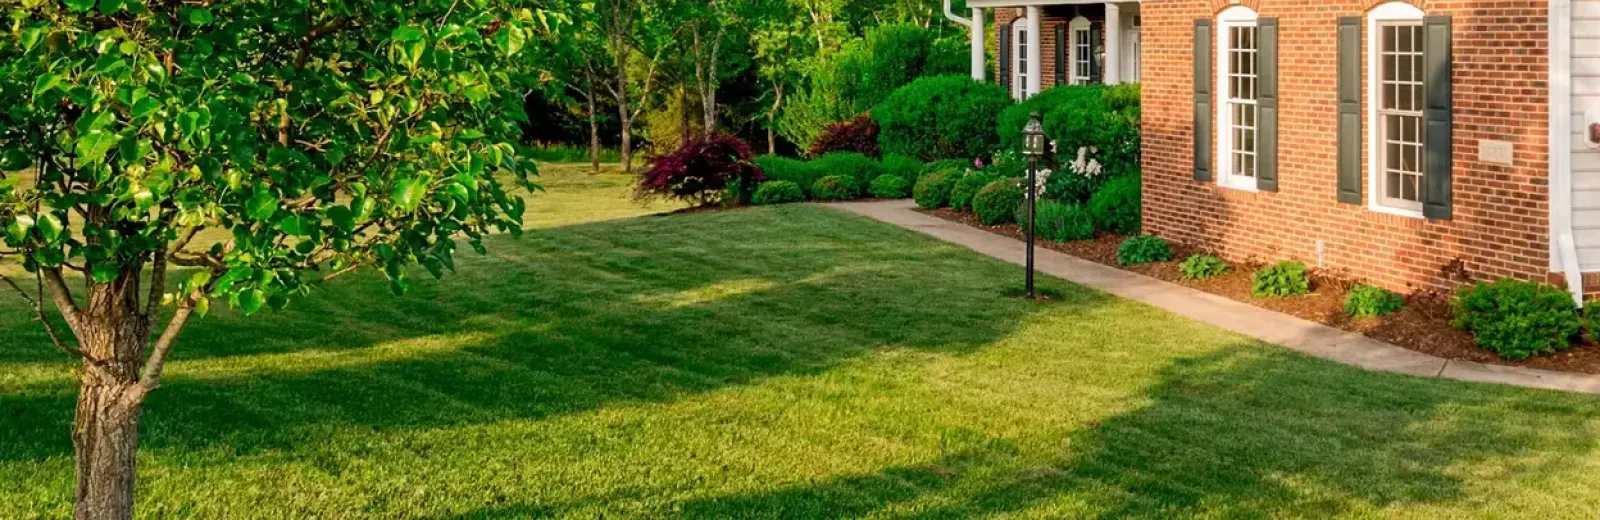 Front lawn with green grass